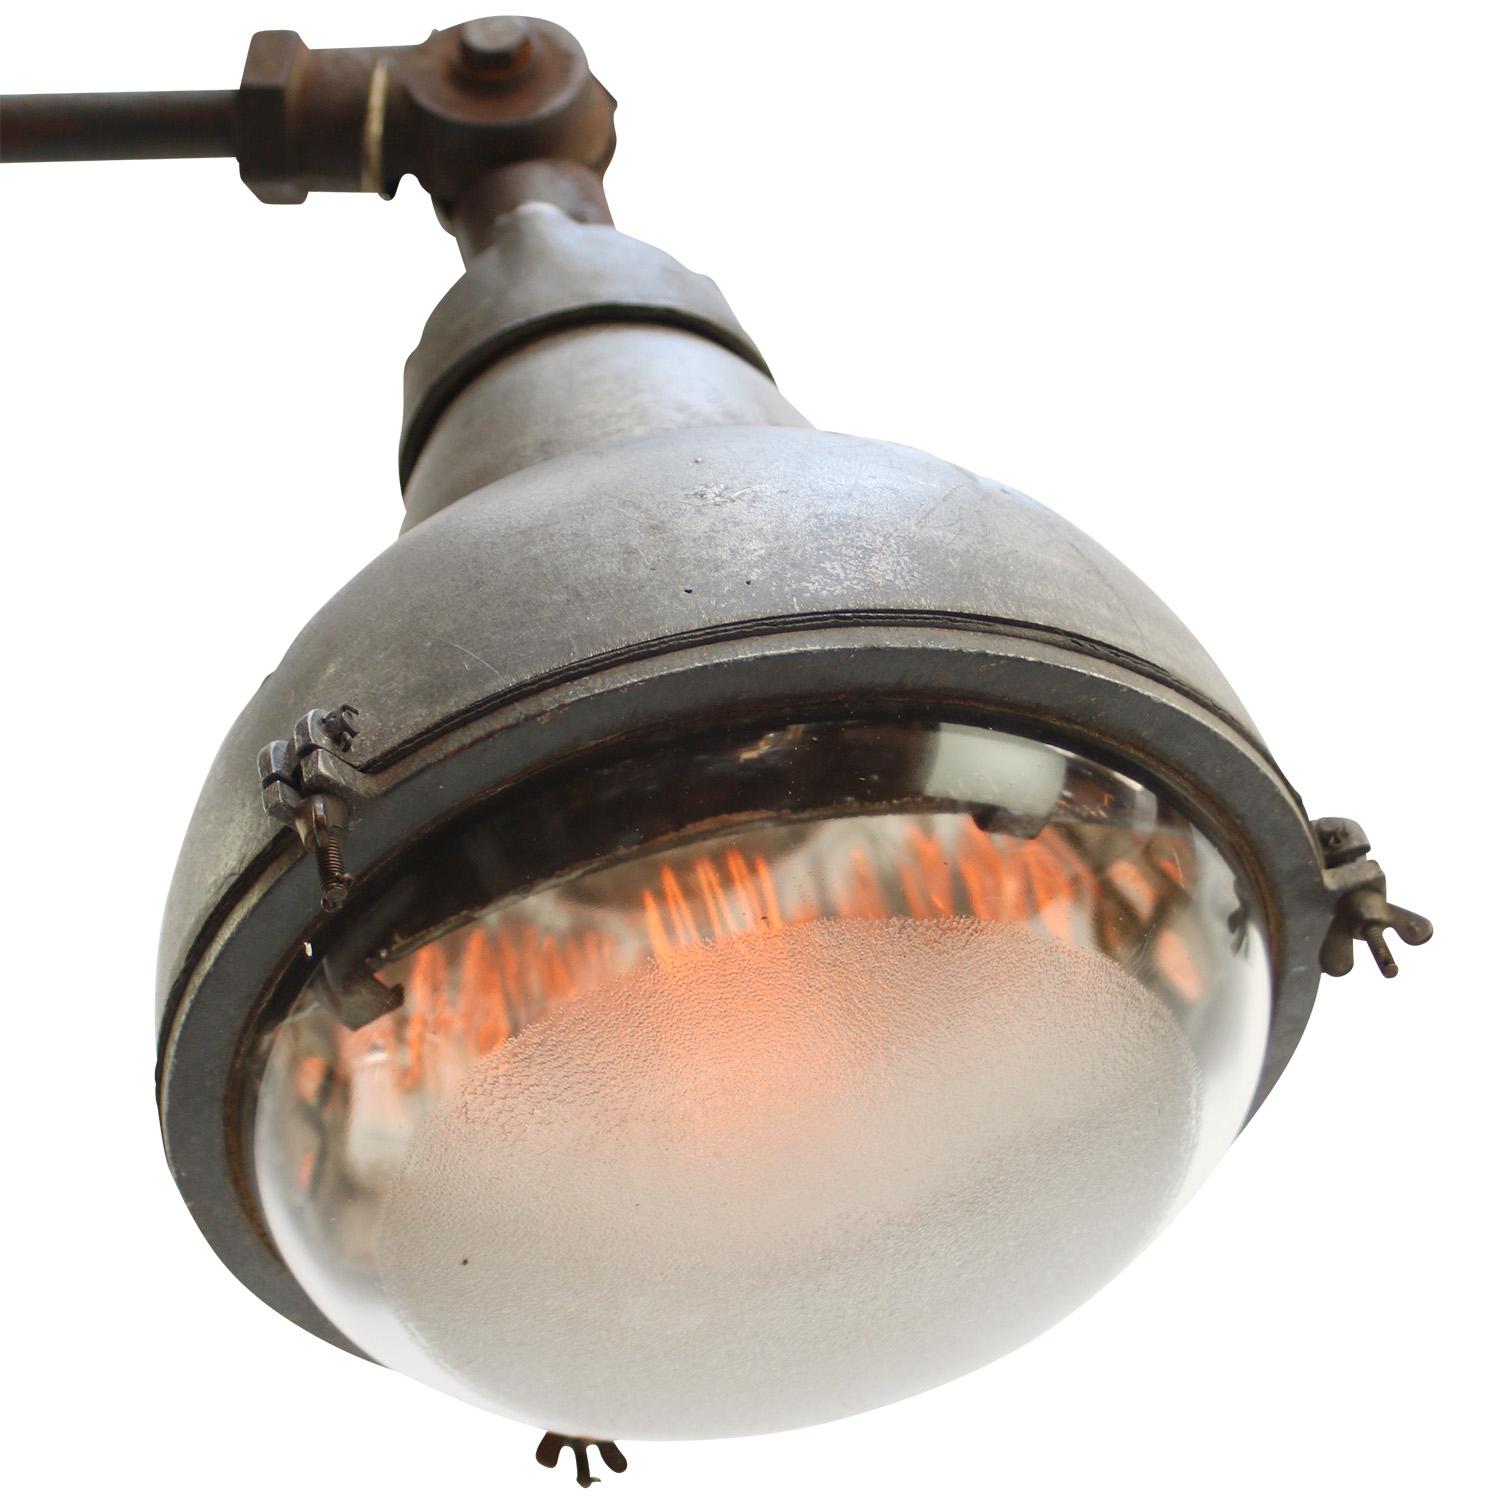 Vintage French cast iron street light by Sammode, France
Metal, cast iron arm, semi frosted glass and inside mercury mirror glass

Diameter wall mount 9 cm

Shipped in parts, easy to assemble

Weight: 5.90 kg / 13 lb

Priced per individual